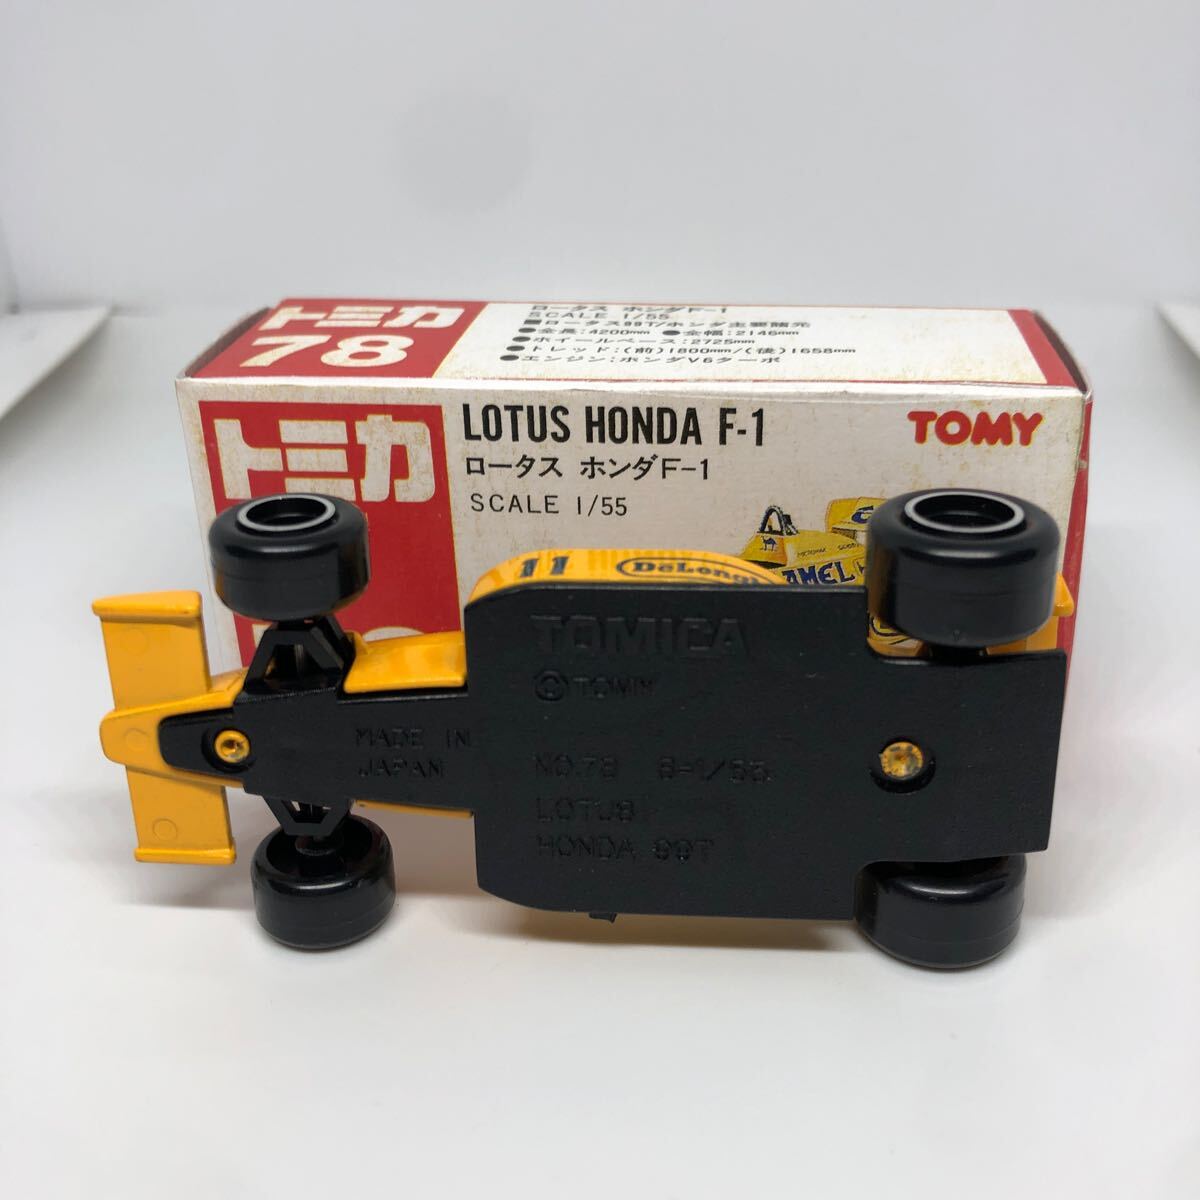  Tomica made in Japan red box 78 Lotus Honda F1 that time thing out of print 